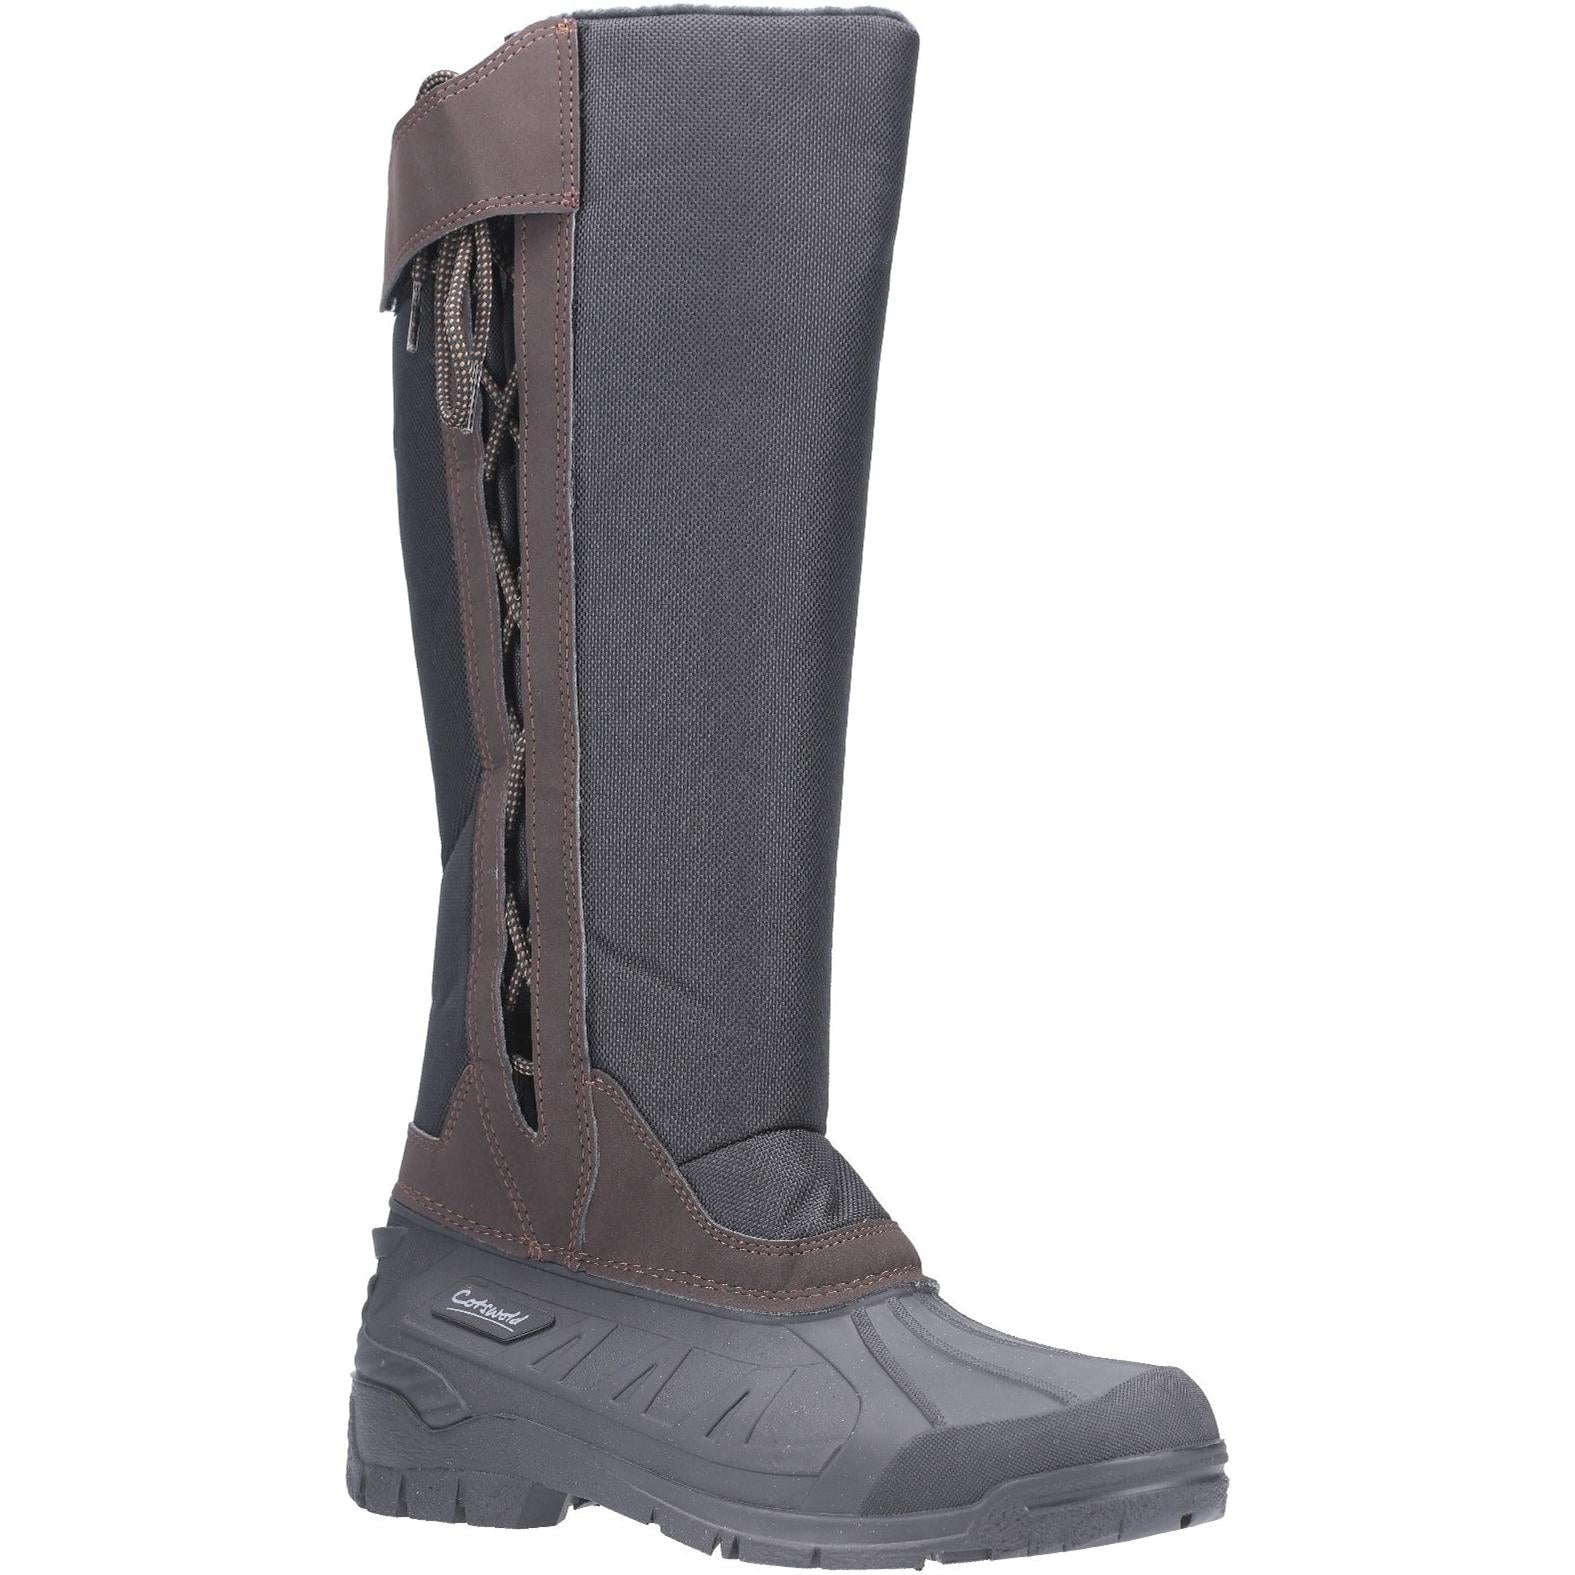 Cotswold Blockley Slip On Boot